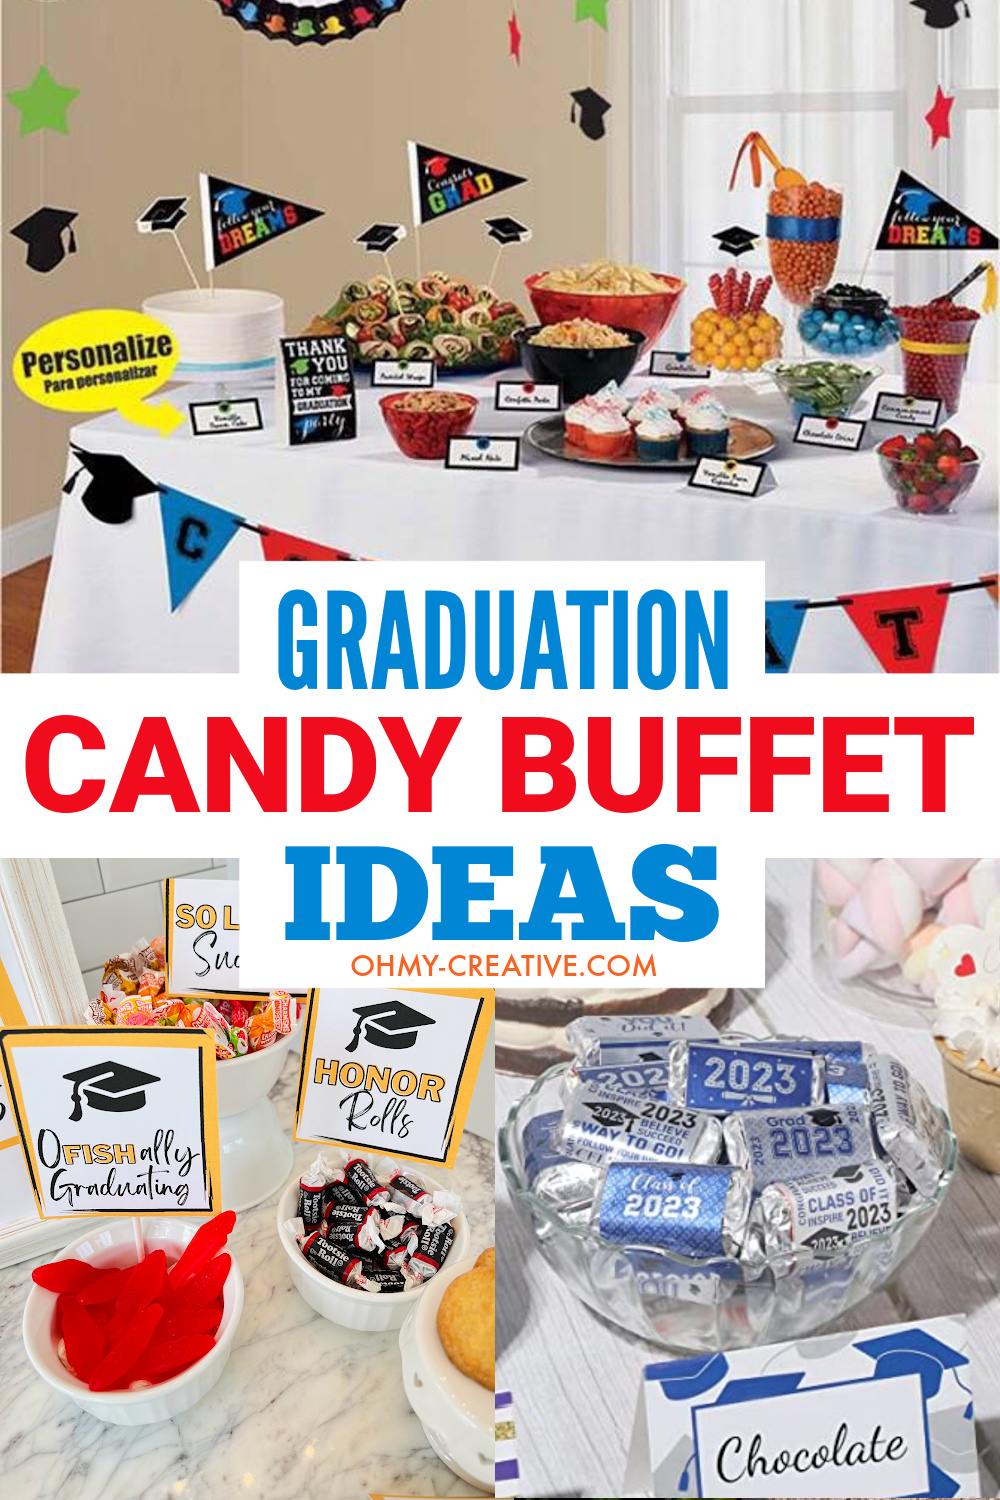 Graduation party candy buffet ideas including printable candy bar signs.